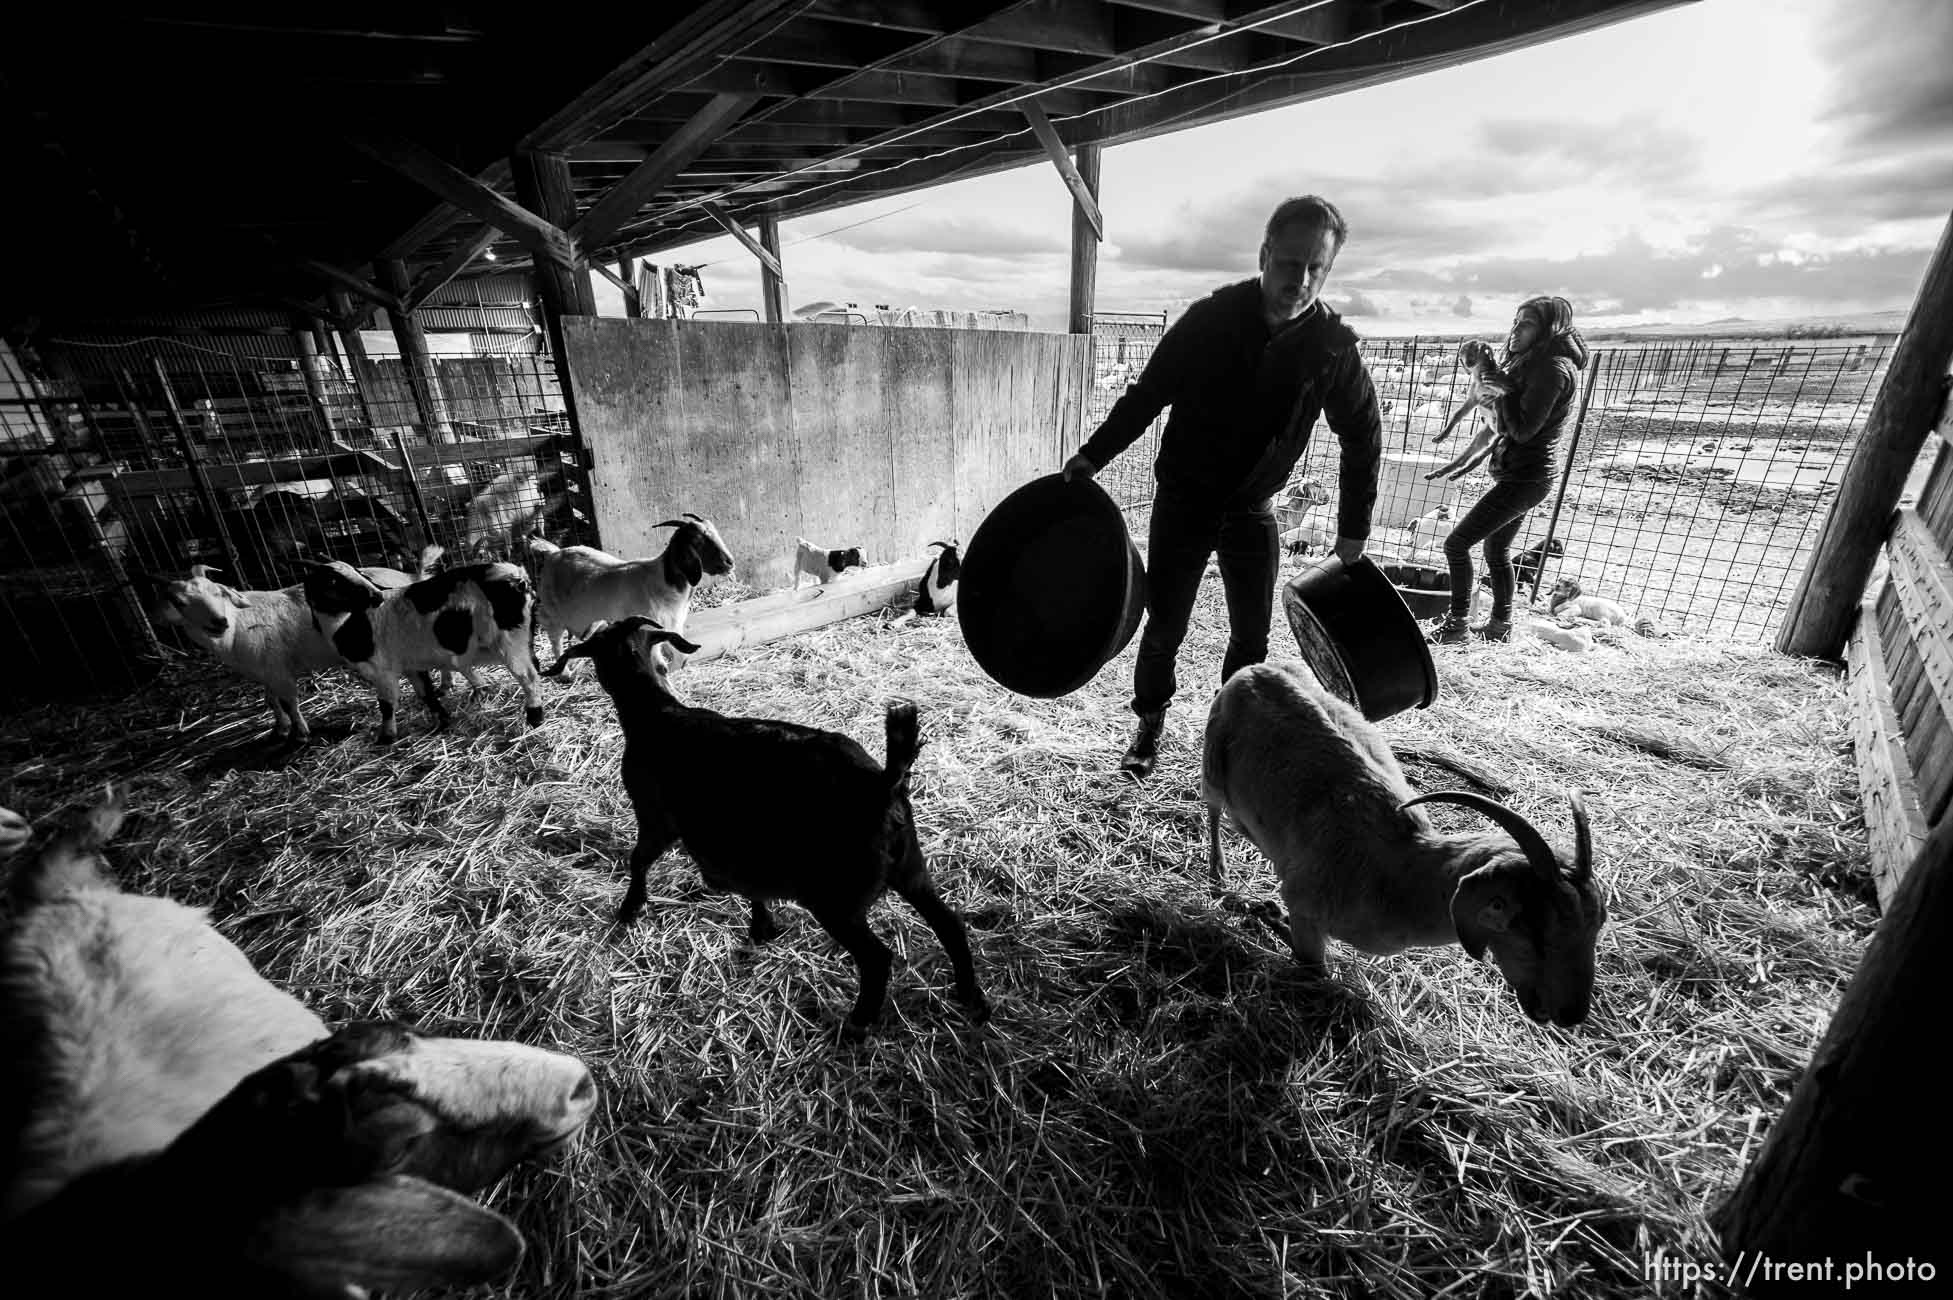 The East Africa Refugee Goat Project